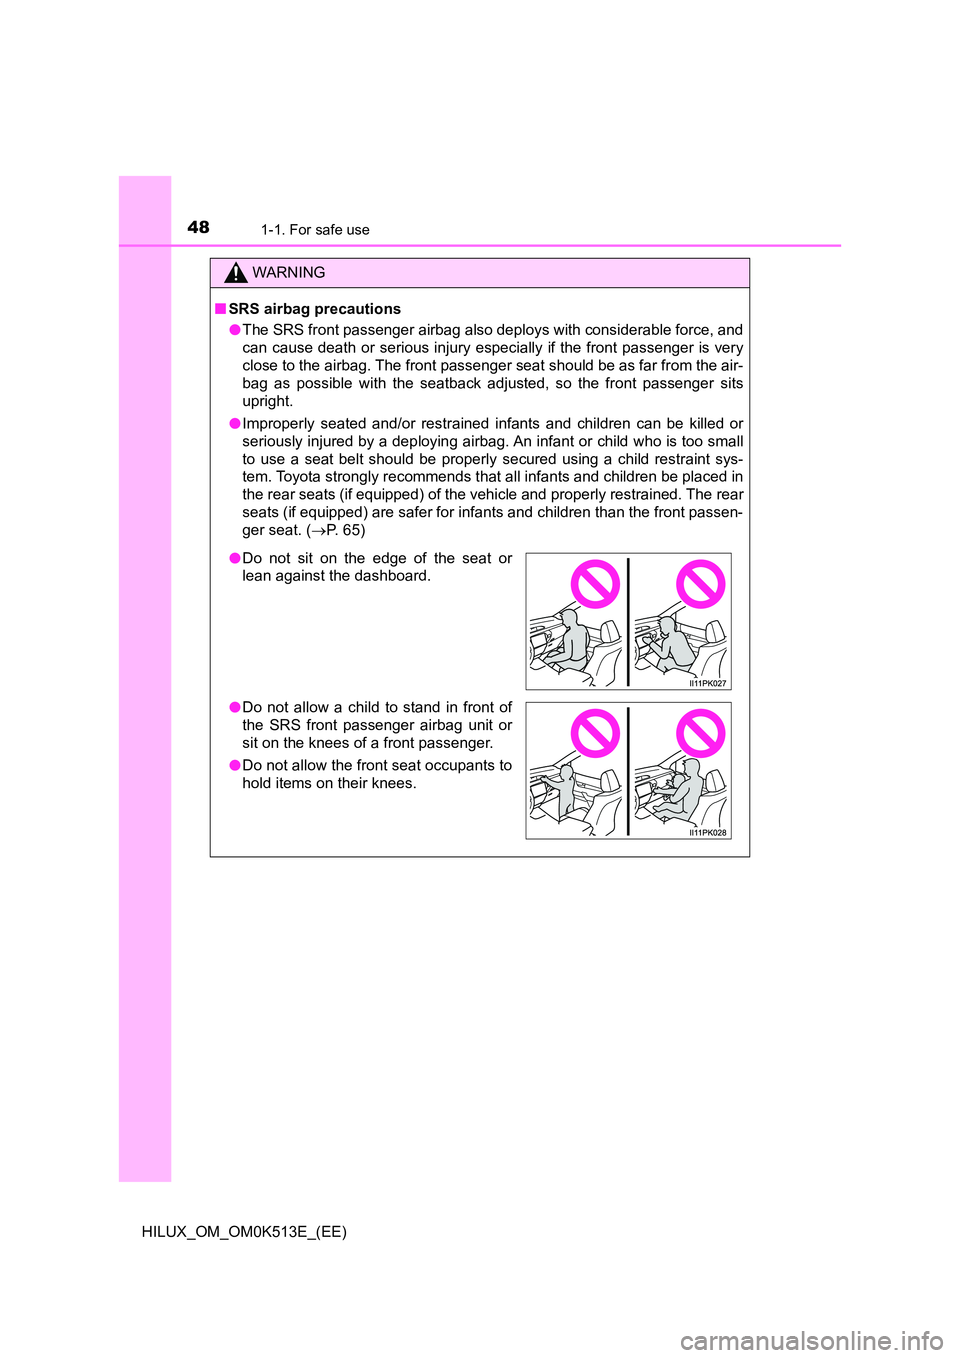 TOYOTA HILUX 2021  Owners Manual (in English) 481-1. For safe use
HILUX_OM_OM0K513E_(EE)
WARNING
�QSRS airbag precautions 
�O The SRS front passenger airbag also deploys with considerable force, and 
can cause death or serious injury especially i